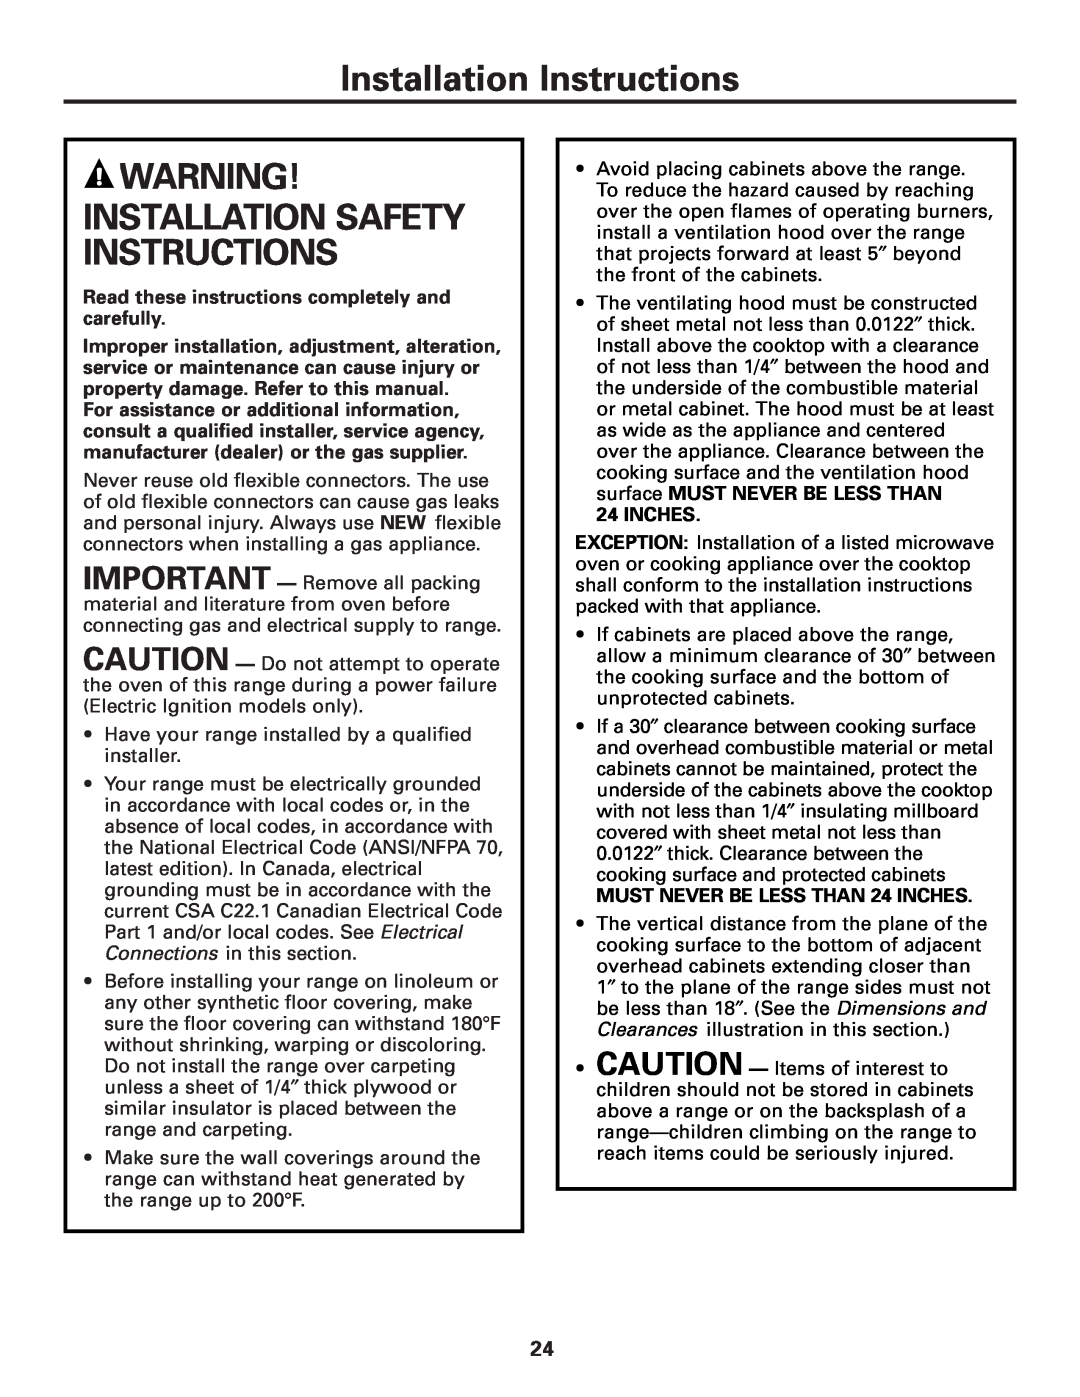 GE JGAS02 Installation Instructions, Installation Safety Instructions, Read these instructions completely and carefully 